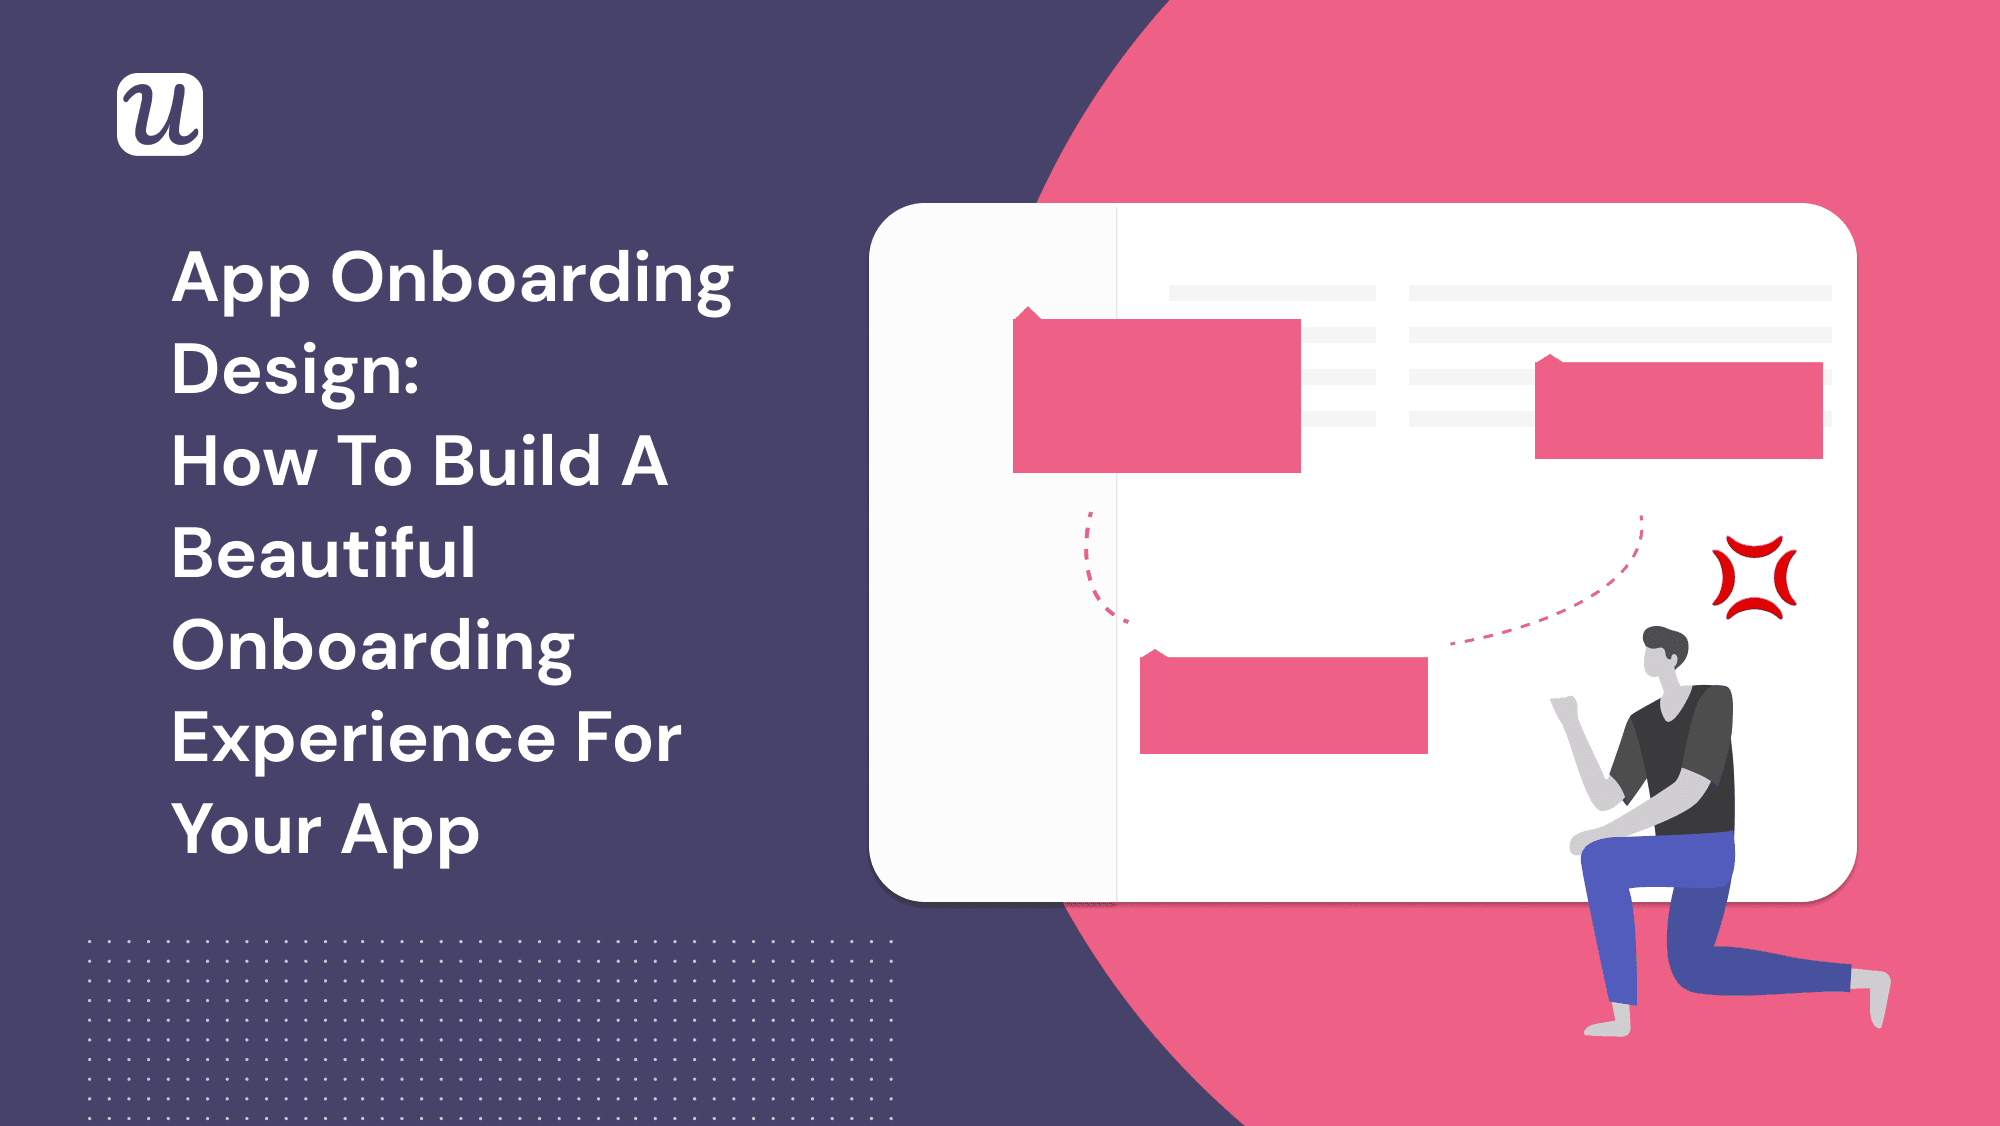 App Onboarding Design: How to Build a Beautiful Onboarding Experience for Your App